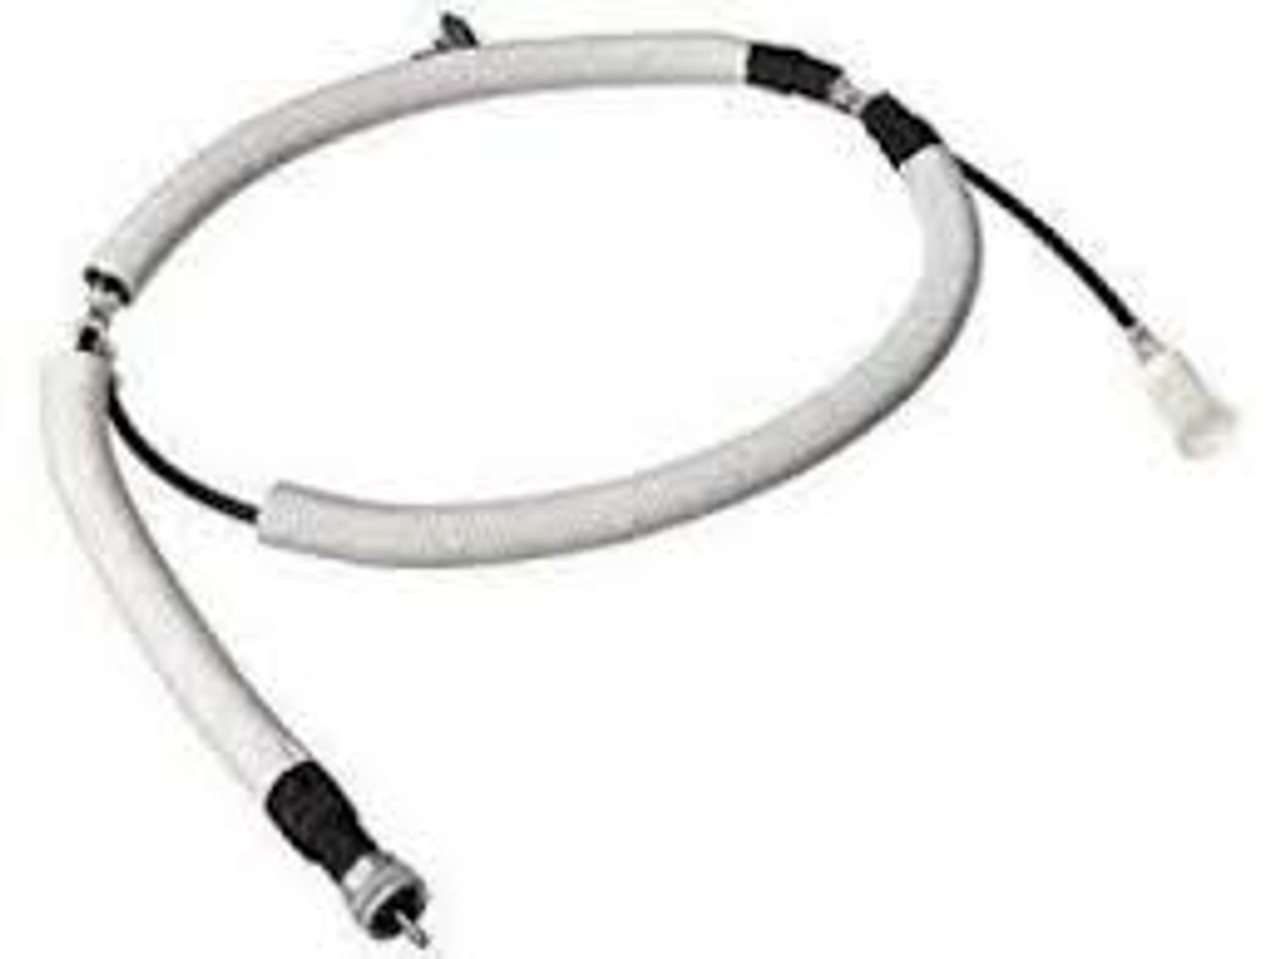 Speedo Cable- Toyota Tacoma V6 3.4L 5VZ Speedometer Drive Cable Assy (1995-1998) 83710-35110

